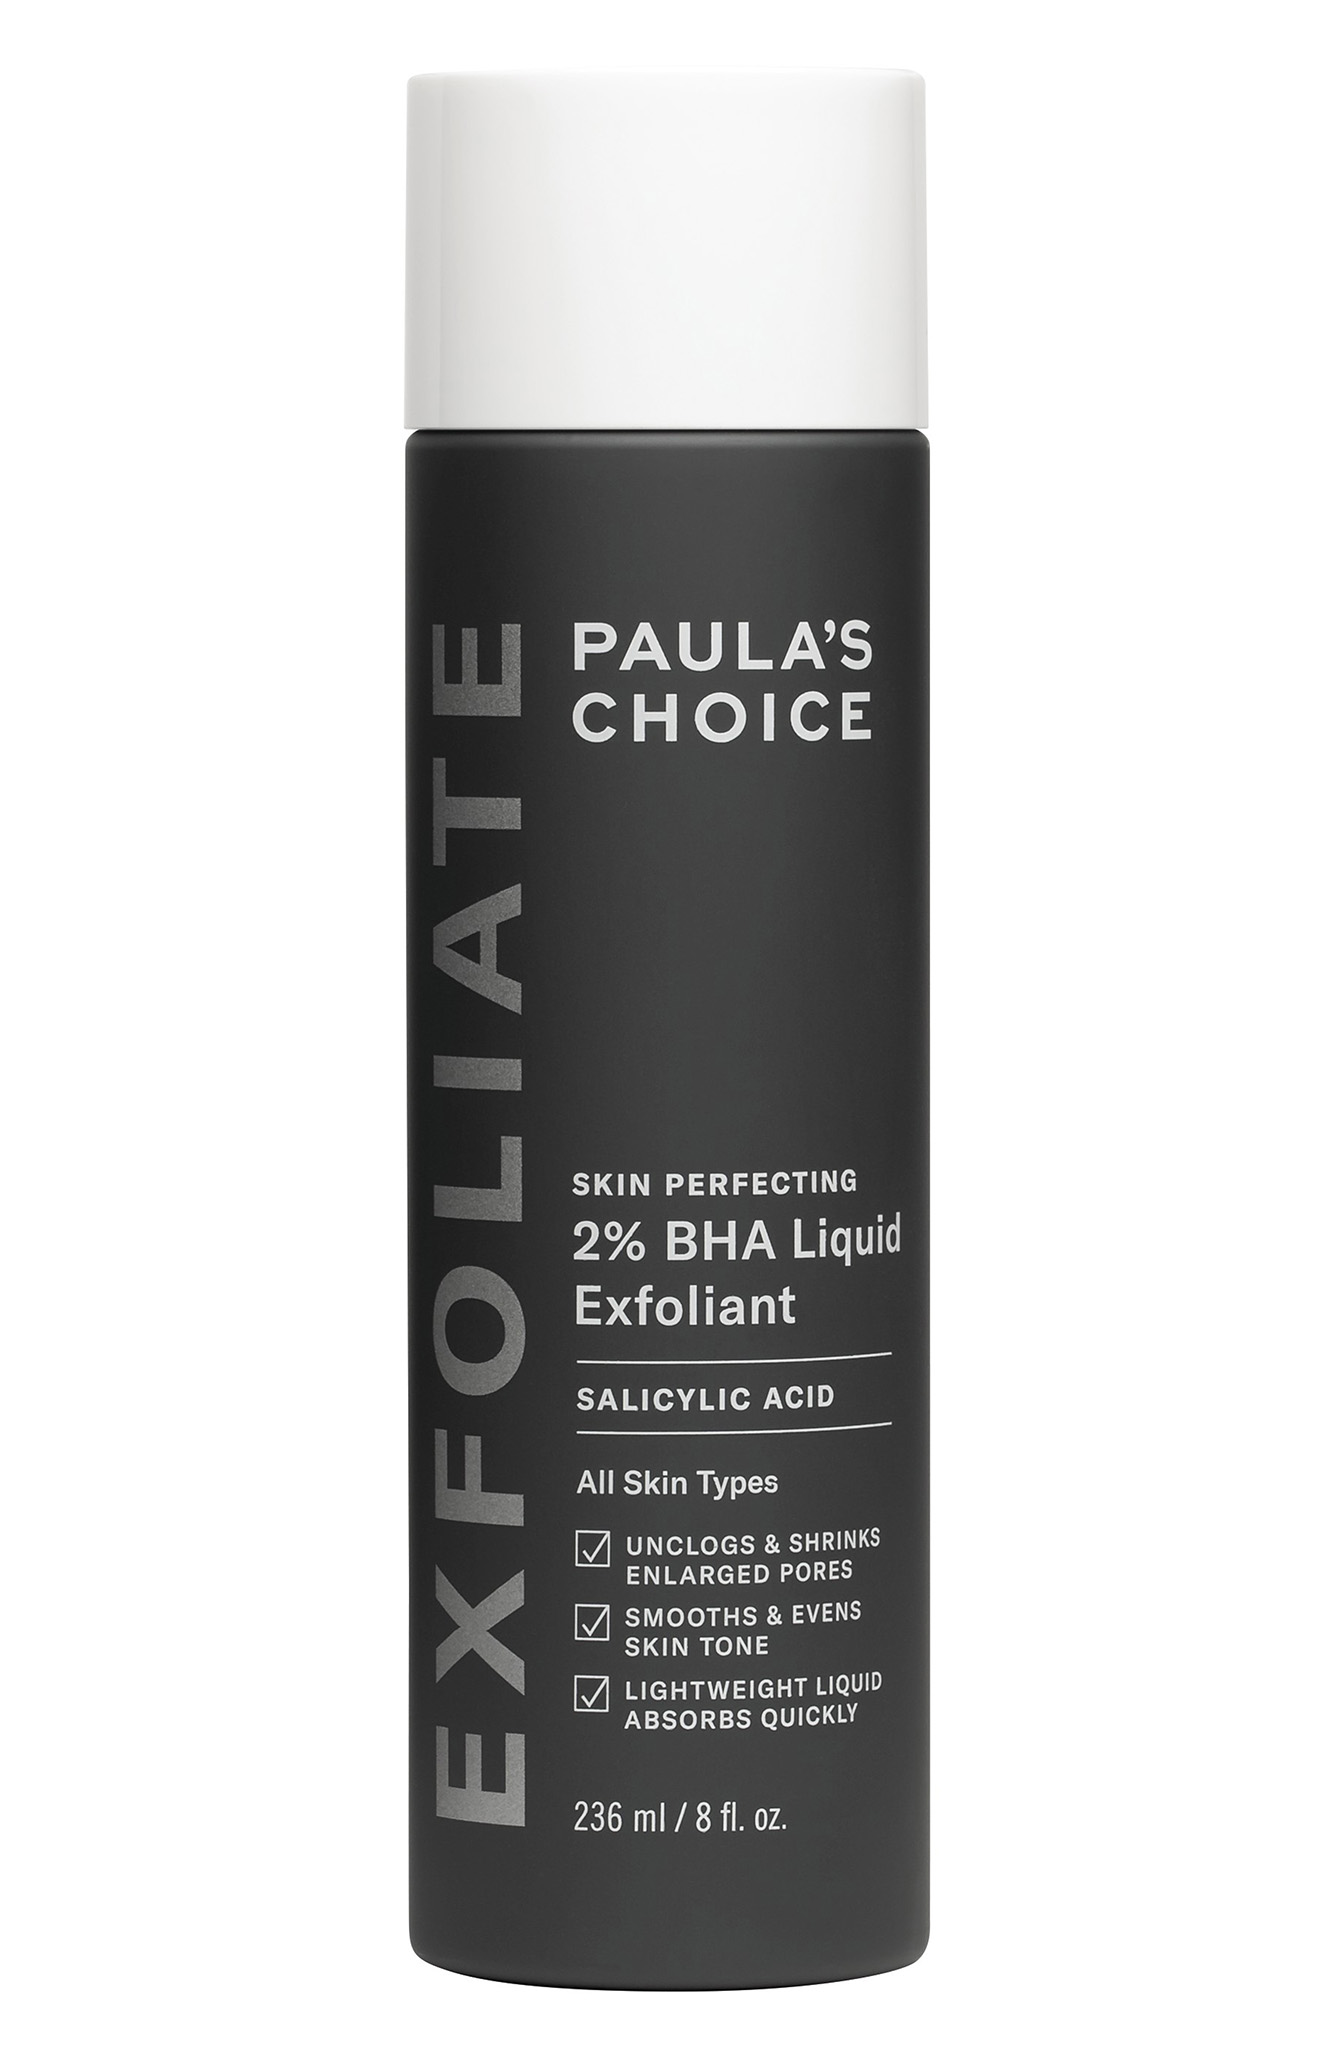 Paula’s Choice Skin Perfecting Jumbo Size 2% BHA Liquid Exfoliant: This is a staple in my routine, when I saw it in the Jumbo size, I knew I had to have it. Just apply it like a toner at night before bed and follow with your other skincare steps and you’ll wake up to a glowing complexion.